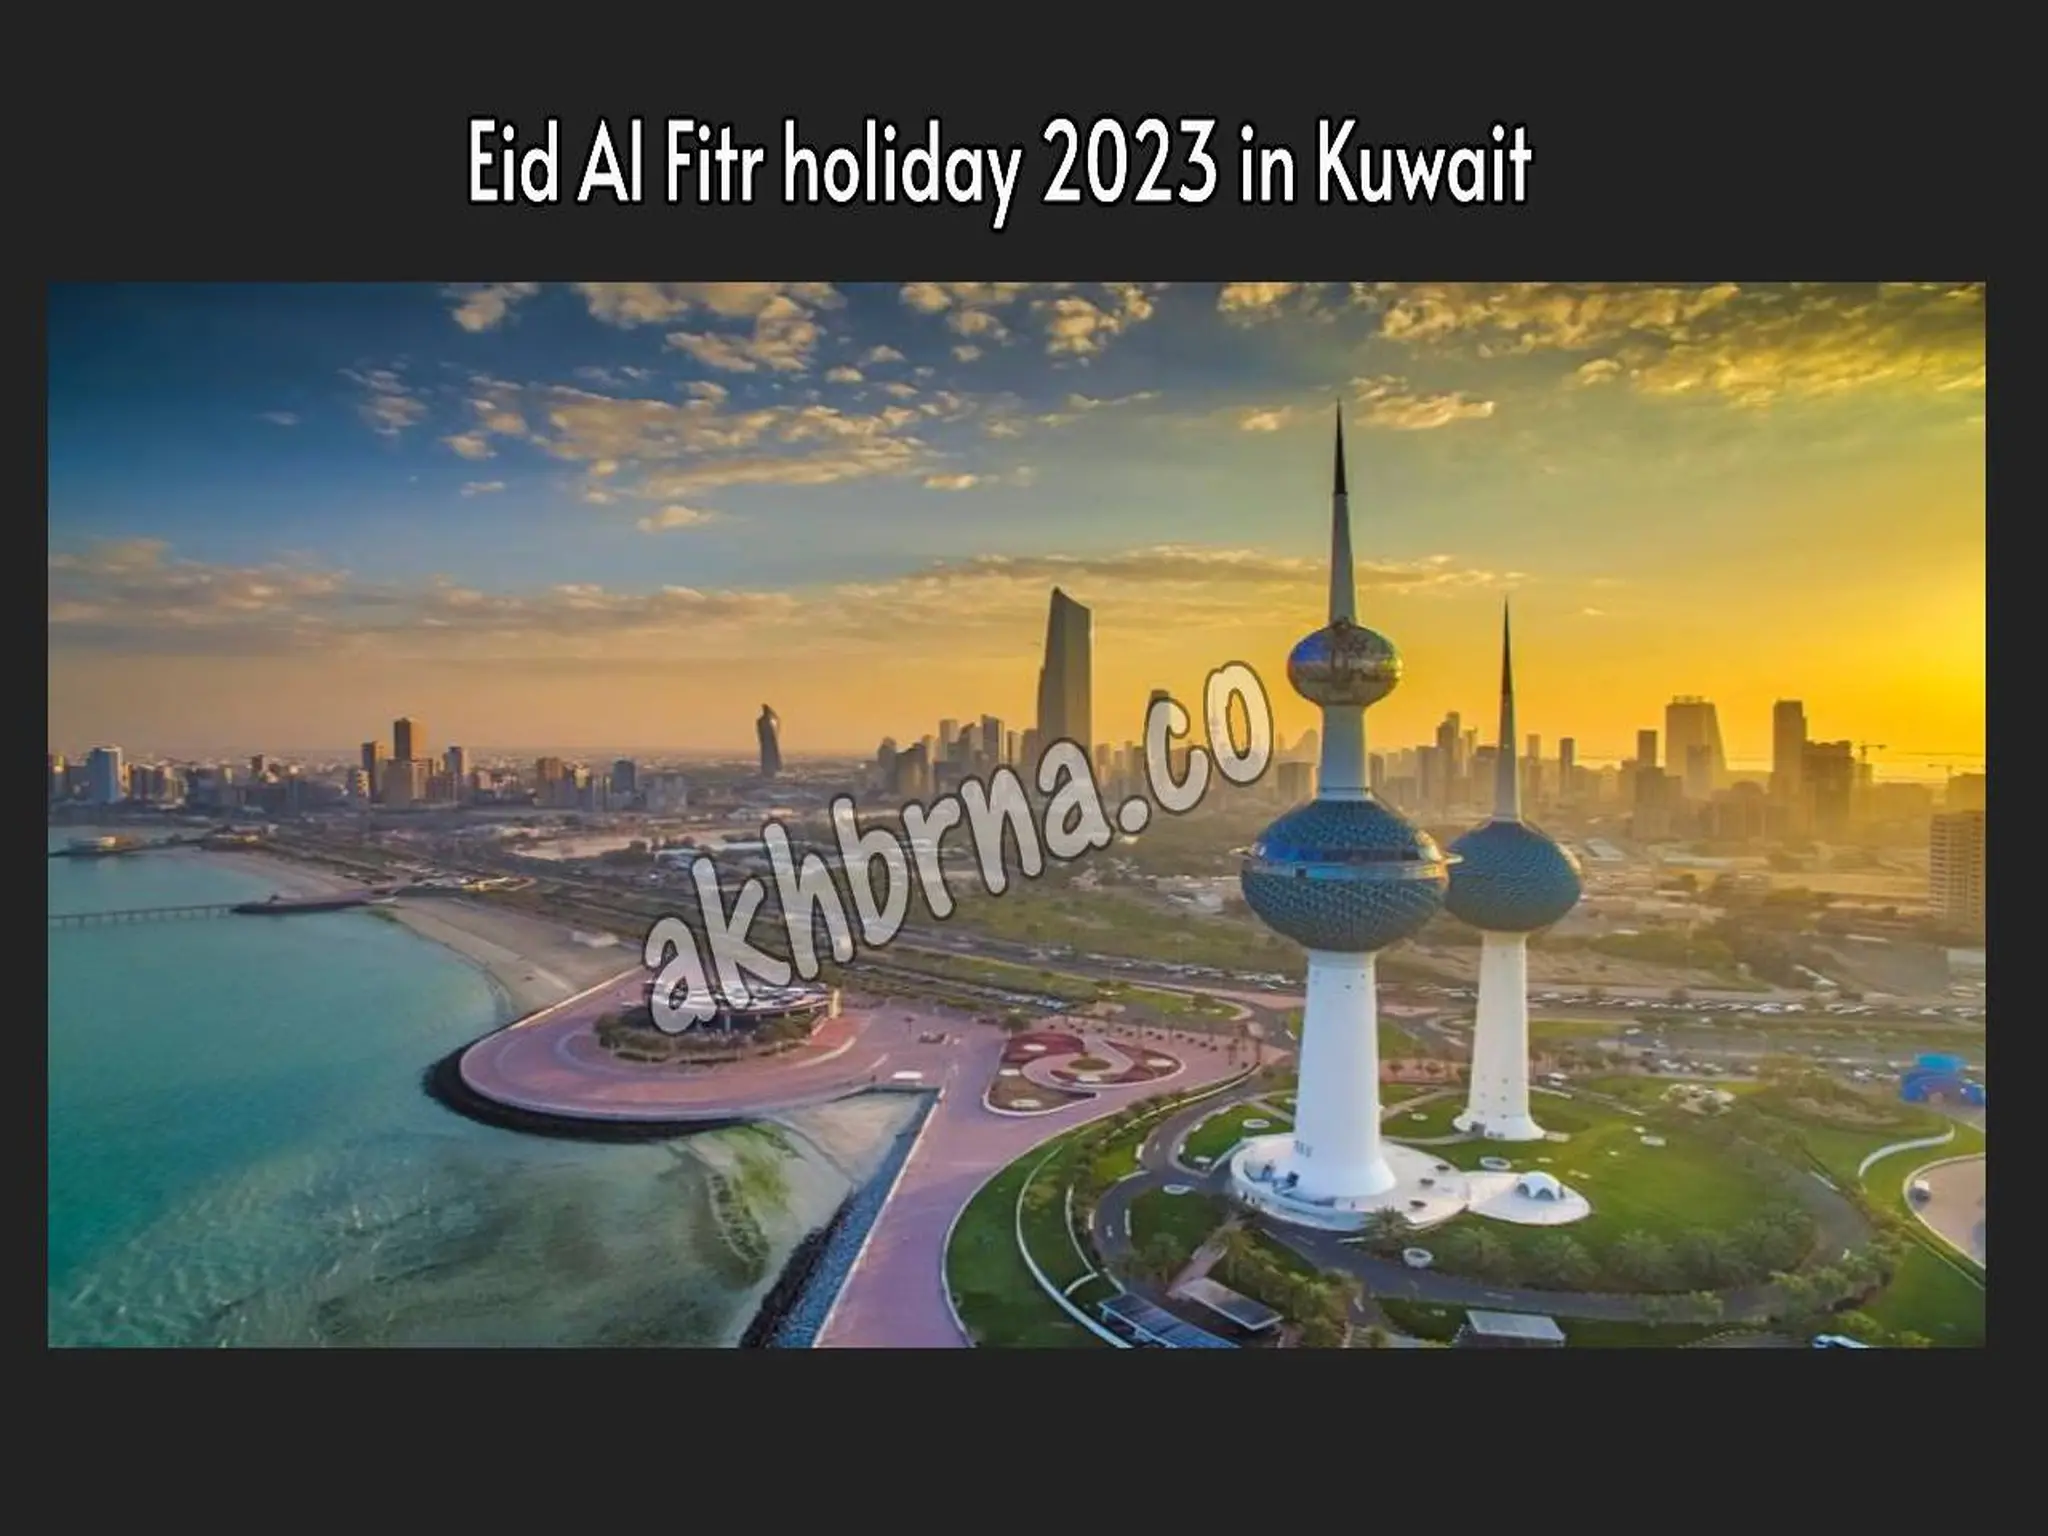 The date of the Eid Al Fitr holiday 2023 in Kuwait for all citizens and expatriates